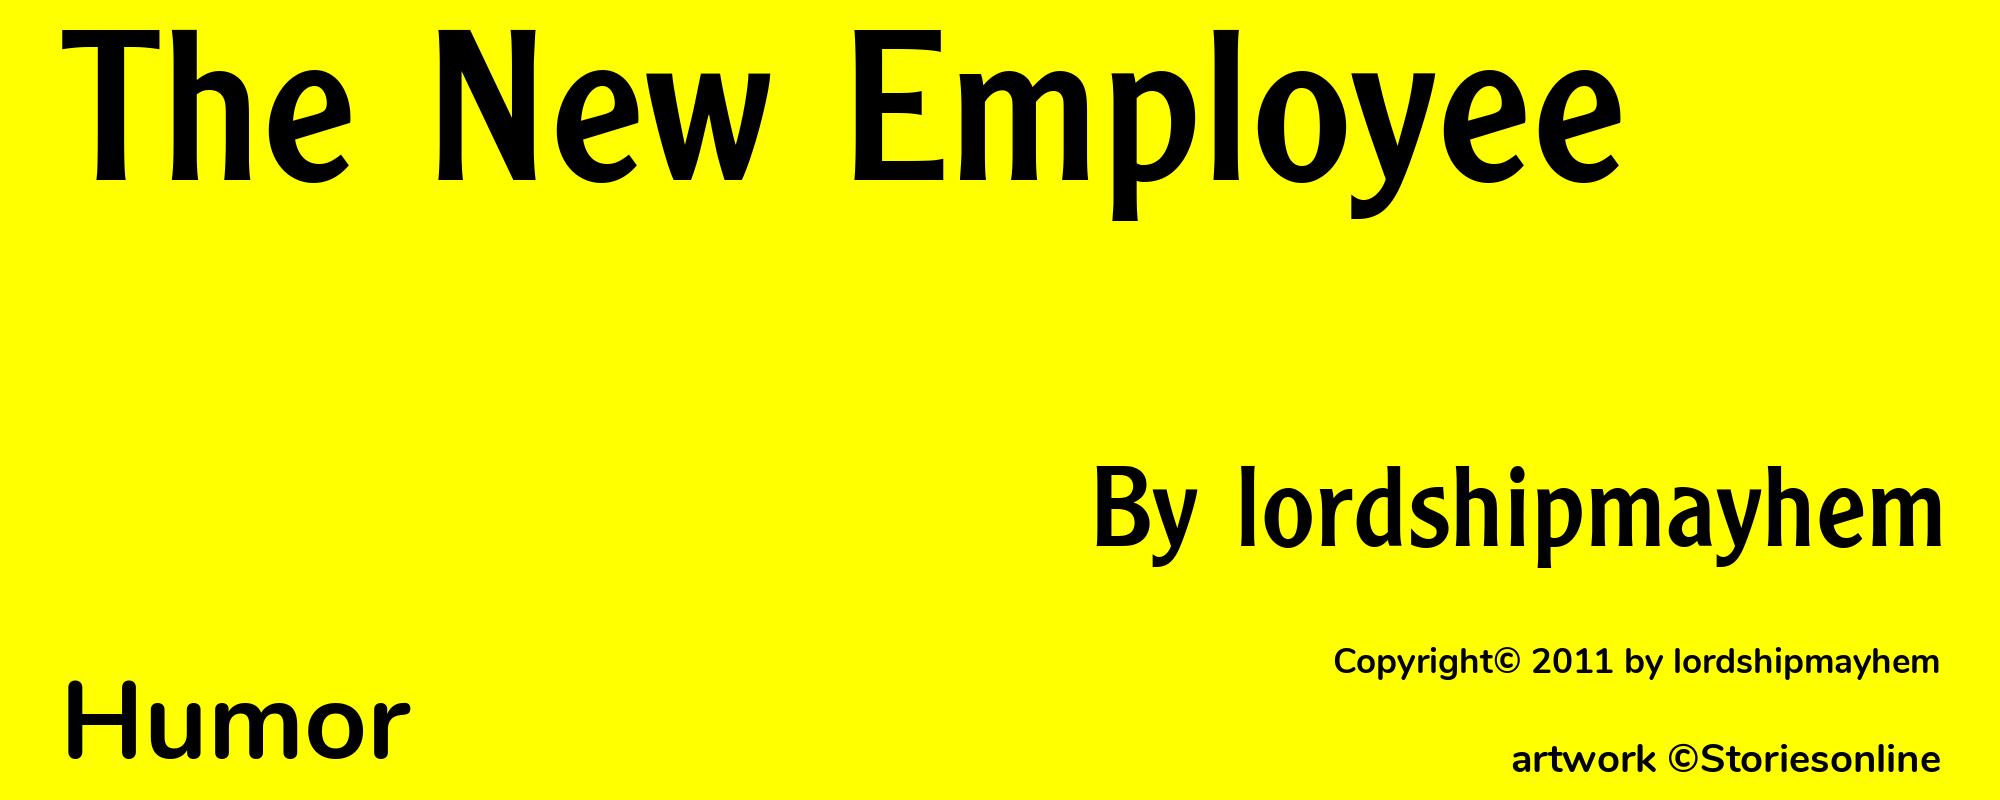 The New Employee - Cover